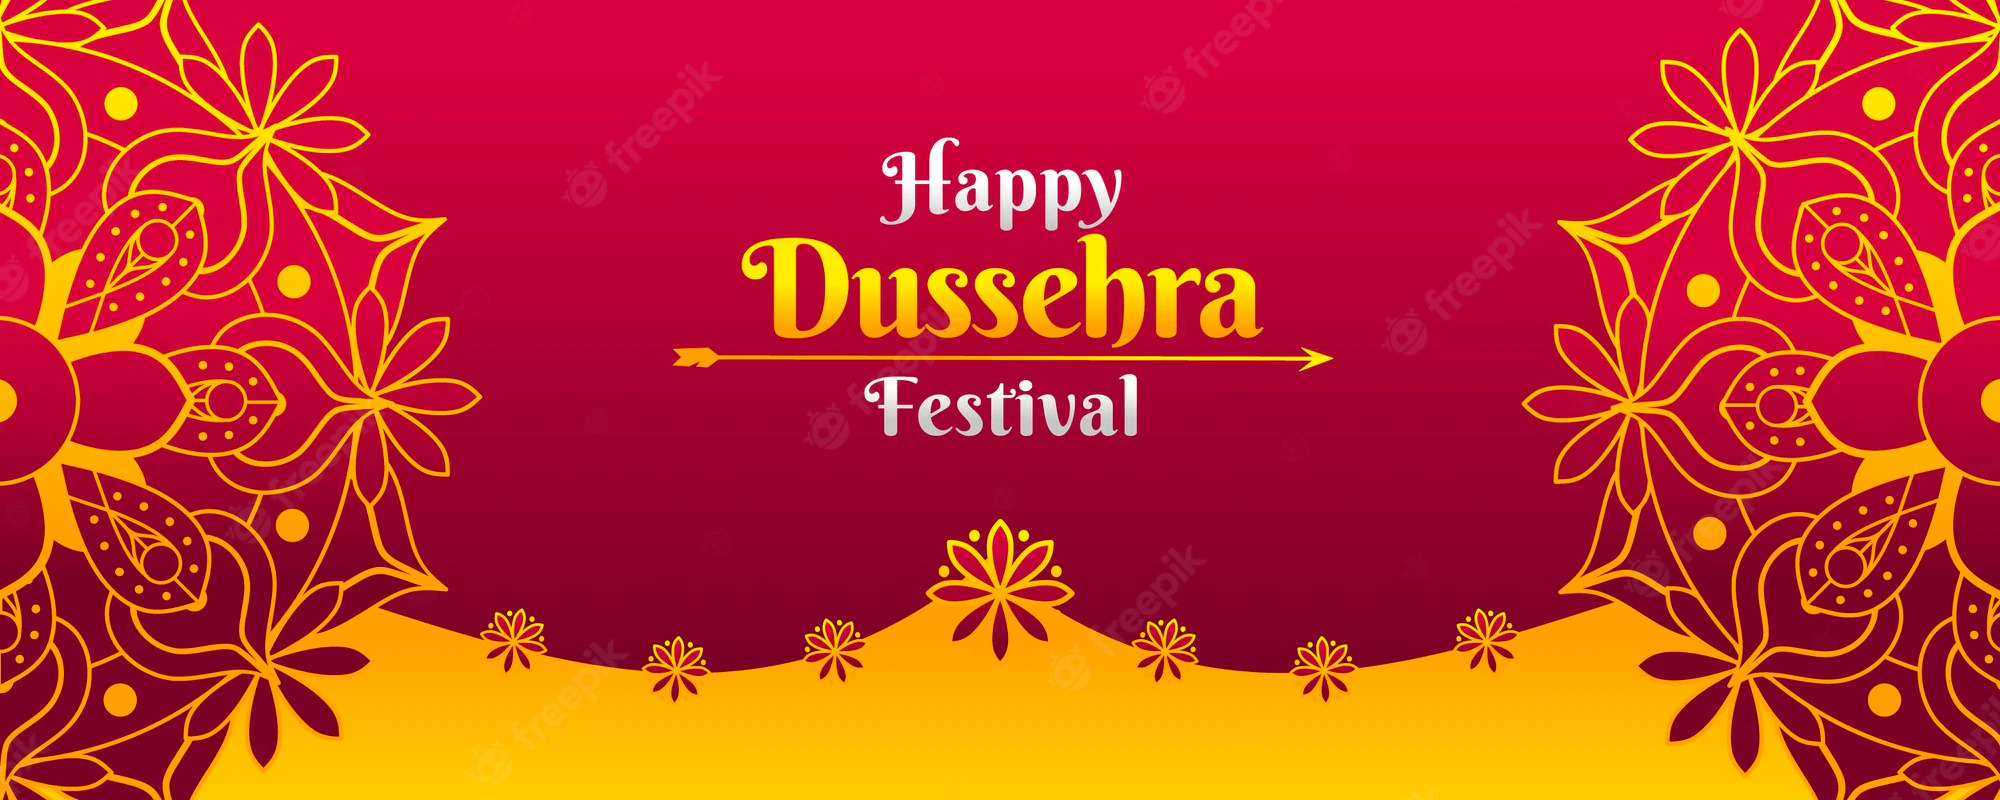 Different ways Dussehra is celebrated in India